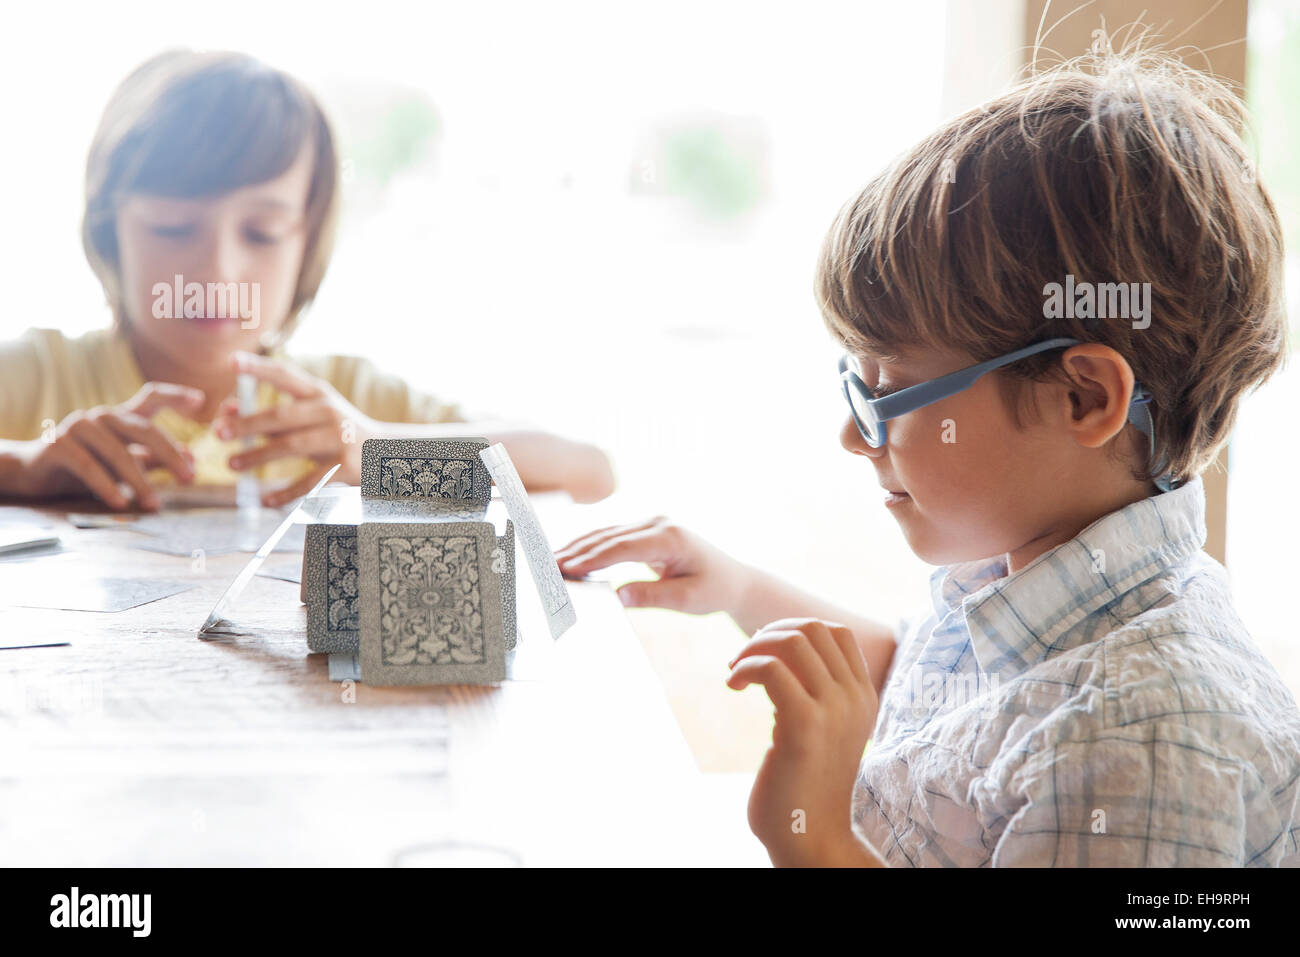 Boys building house of cards together Stock Photo